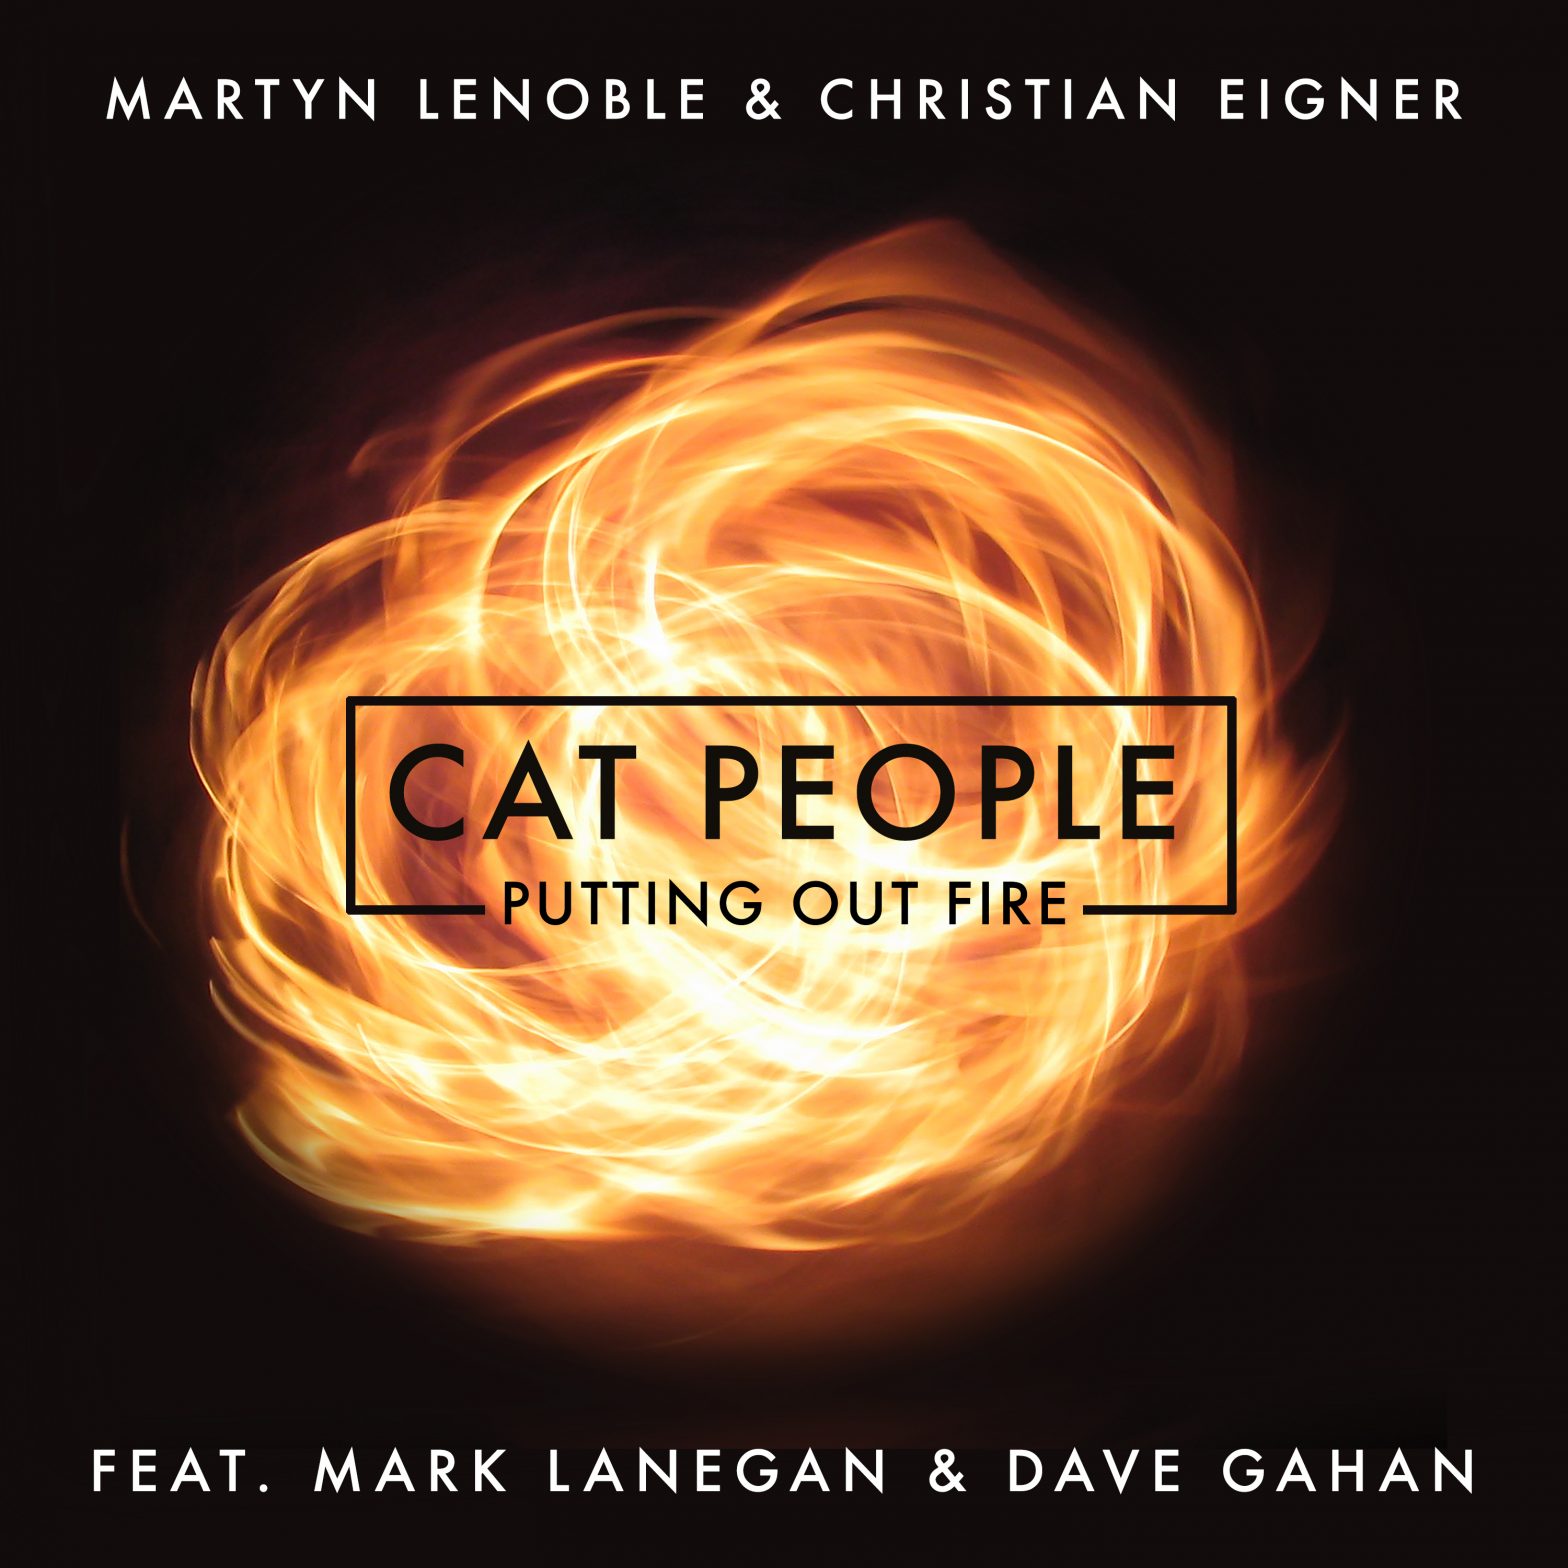 Martyn LeNoble & Christian Eigner [feat. Mark Lanegan & Dave Gahan] – “Cat People (Putting Out Fire)”